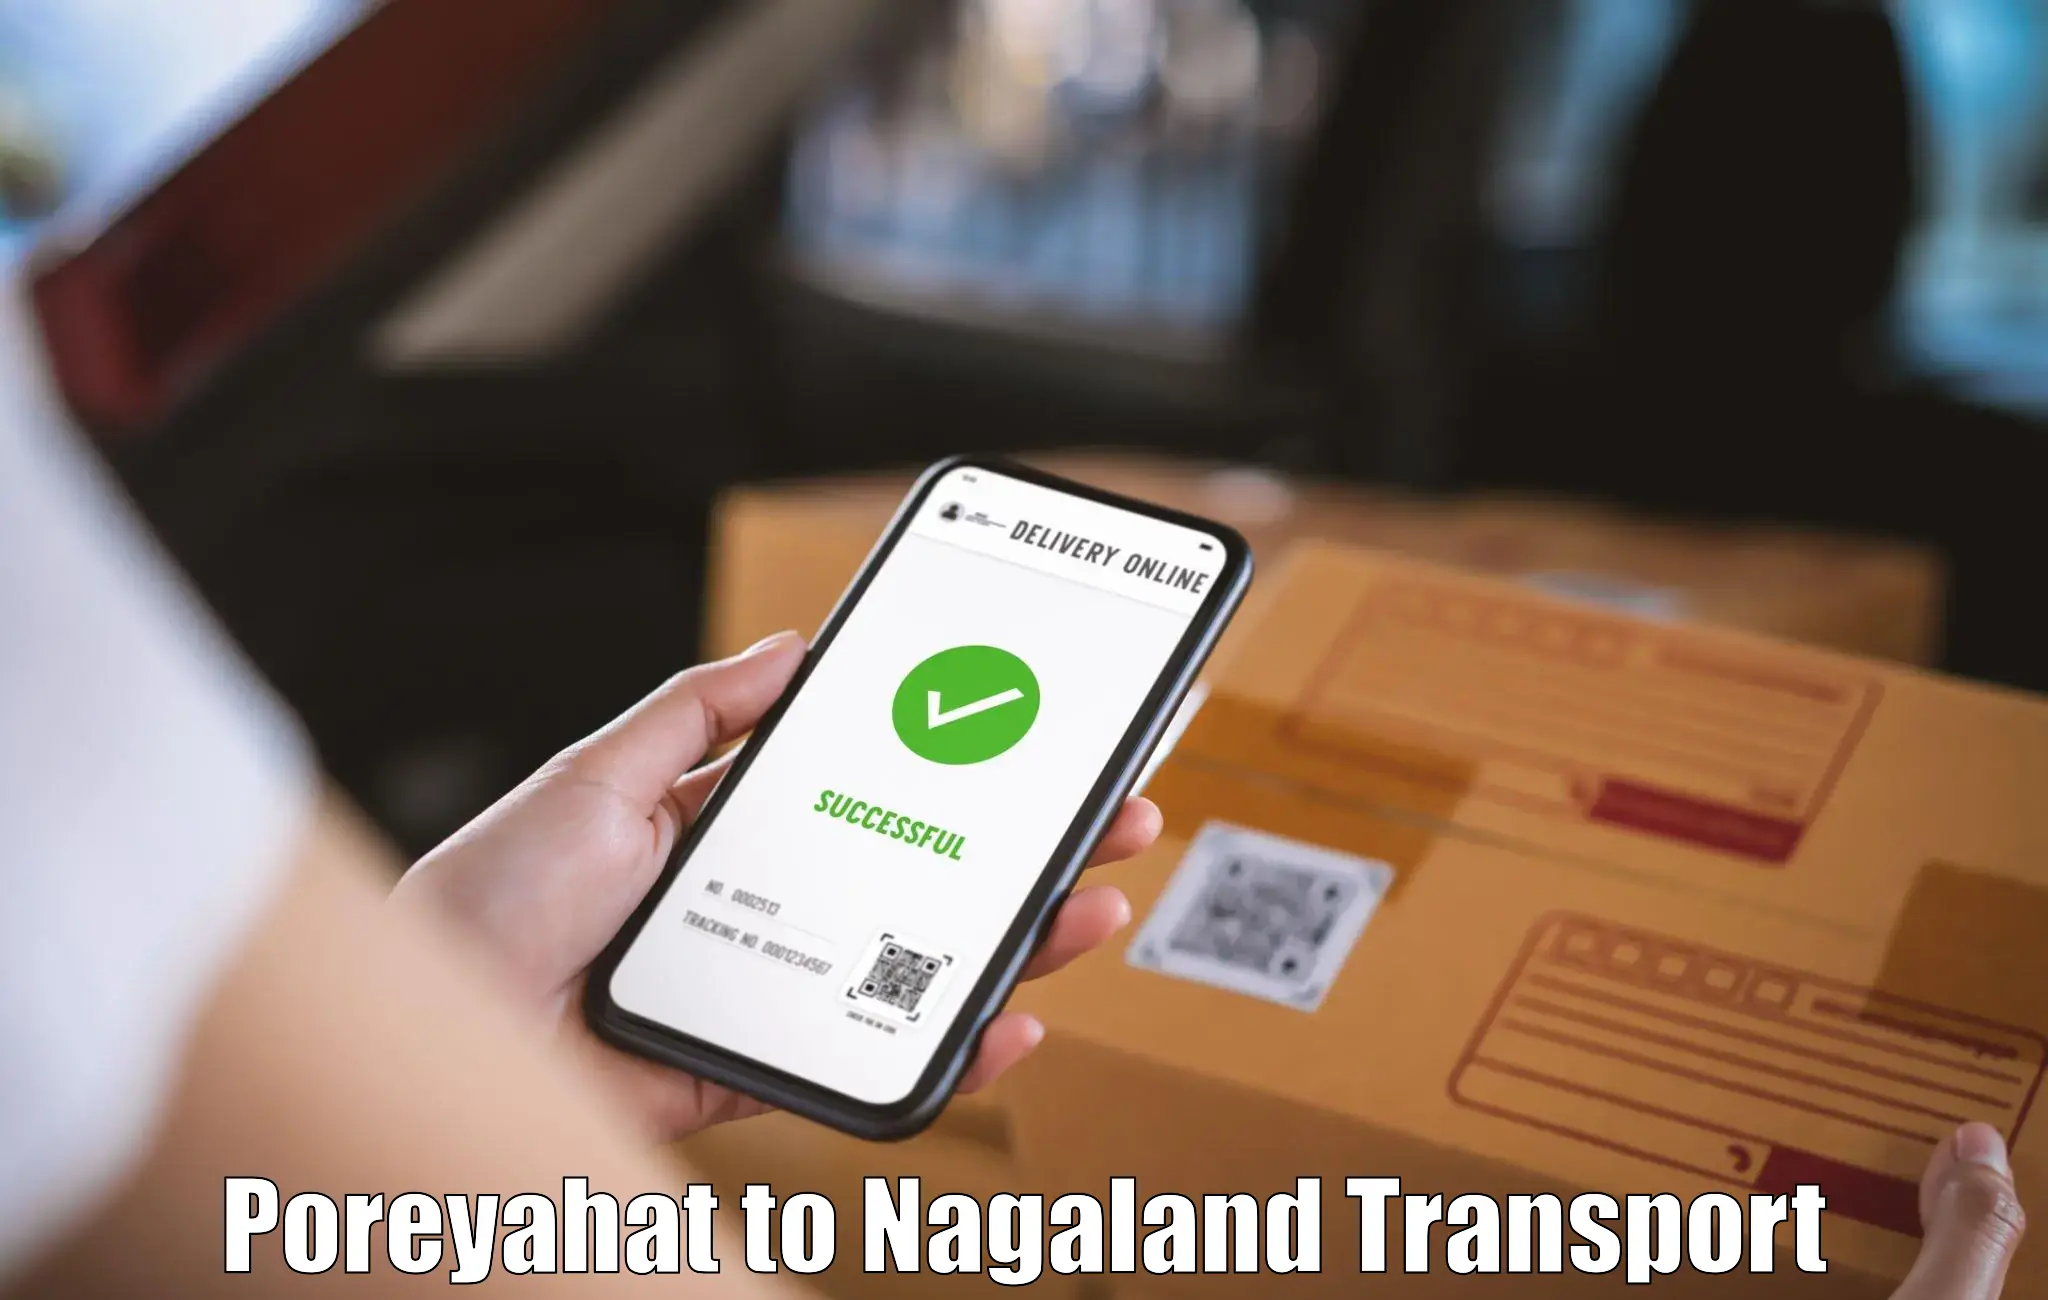 Material transport services Poreyahat to Peren